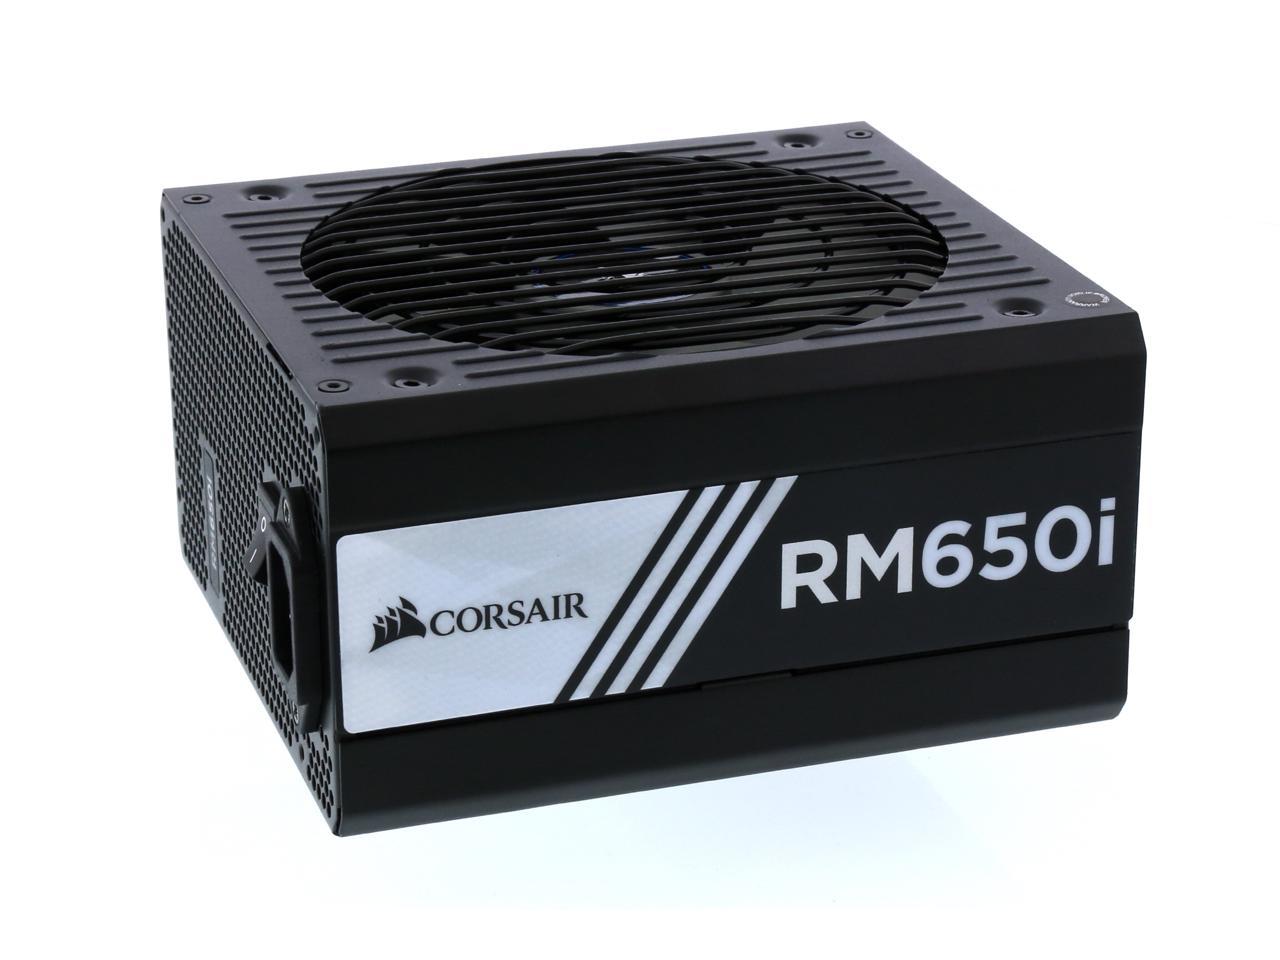 Corsair Rmi Series Rm650i 650w 80 Plus Gold Haswell Ready Full Modular Atx12v Eps12v Sli And Crossfire Ready Power Supply With C Link Monitoring And Control Newegg Com